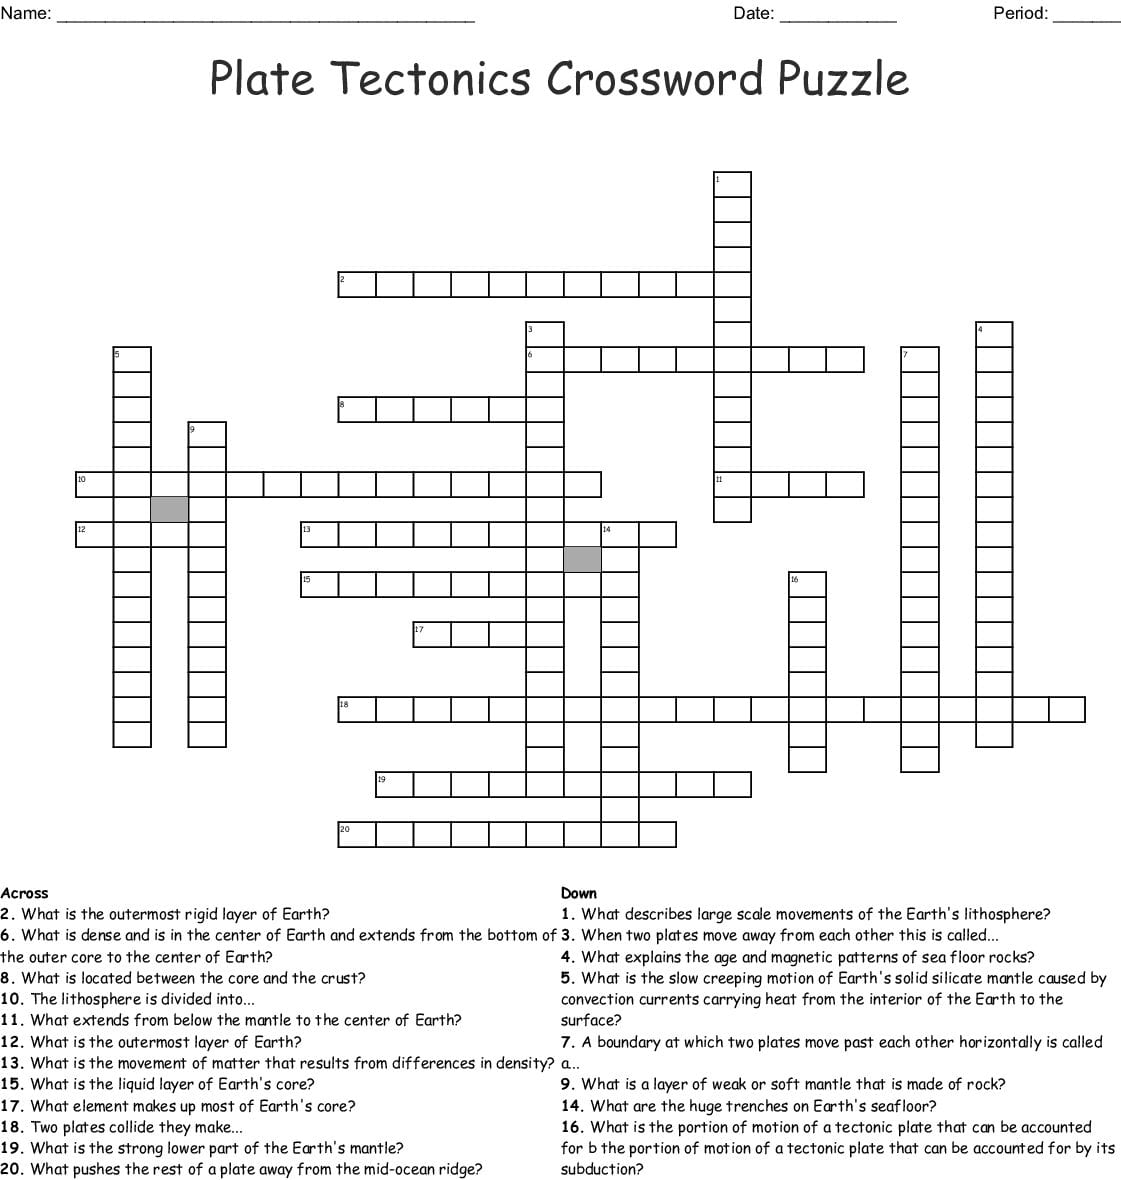 Plate Tectonics Crossword Puzzle Worksheet Answers | db-excel.com